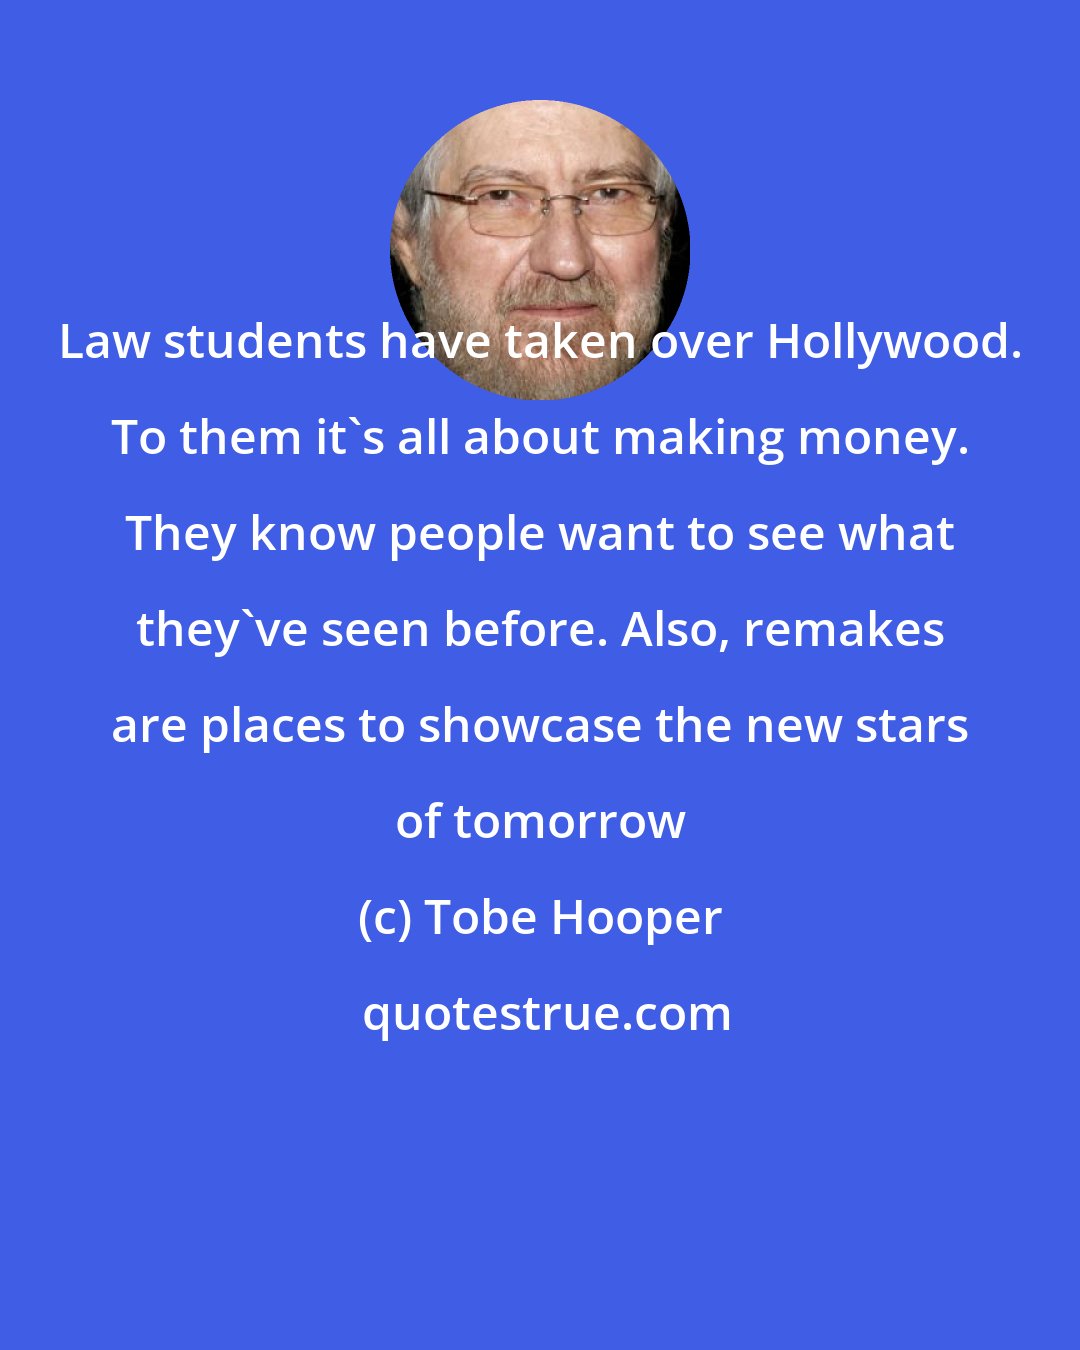 Tobe Hooper: Law students have taken over Hollywood. To them it's all about making money. They know people want to see what they've seen before. Also, remakes are places to showcase the new stars of tomorrow